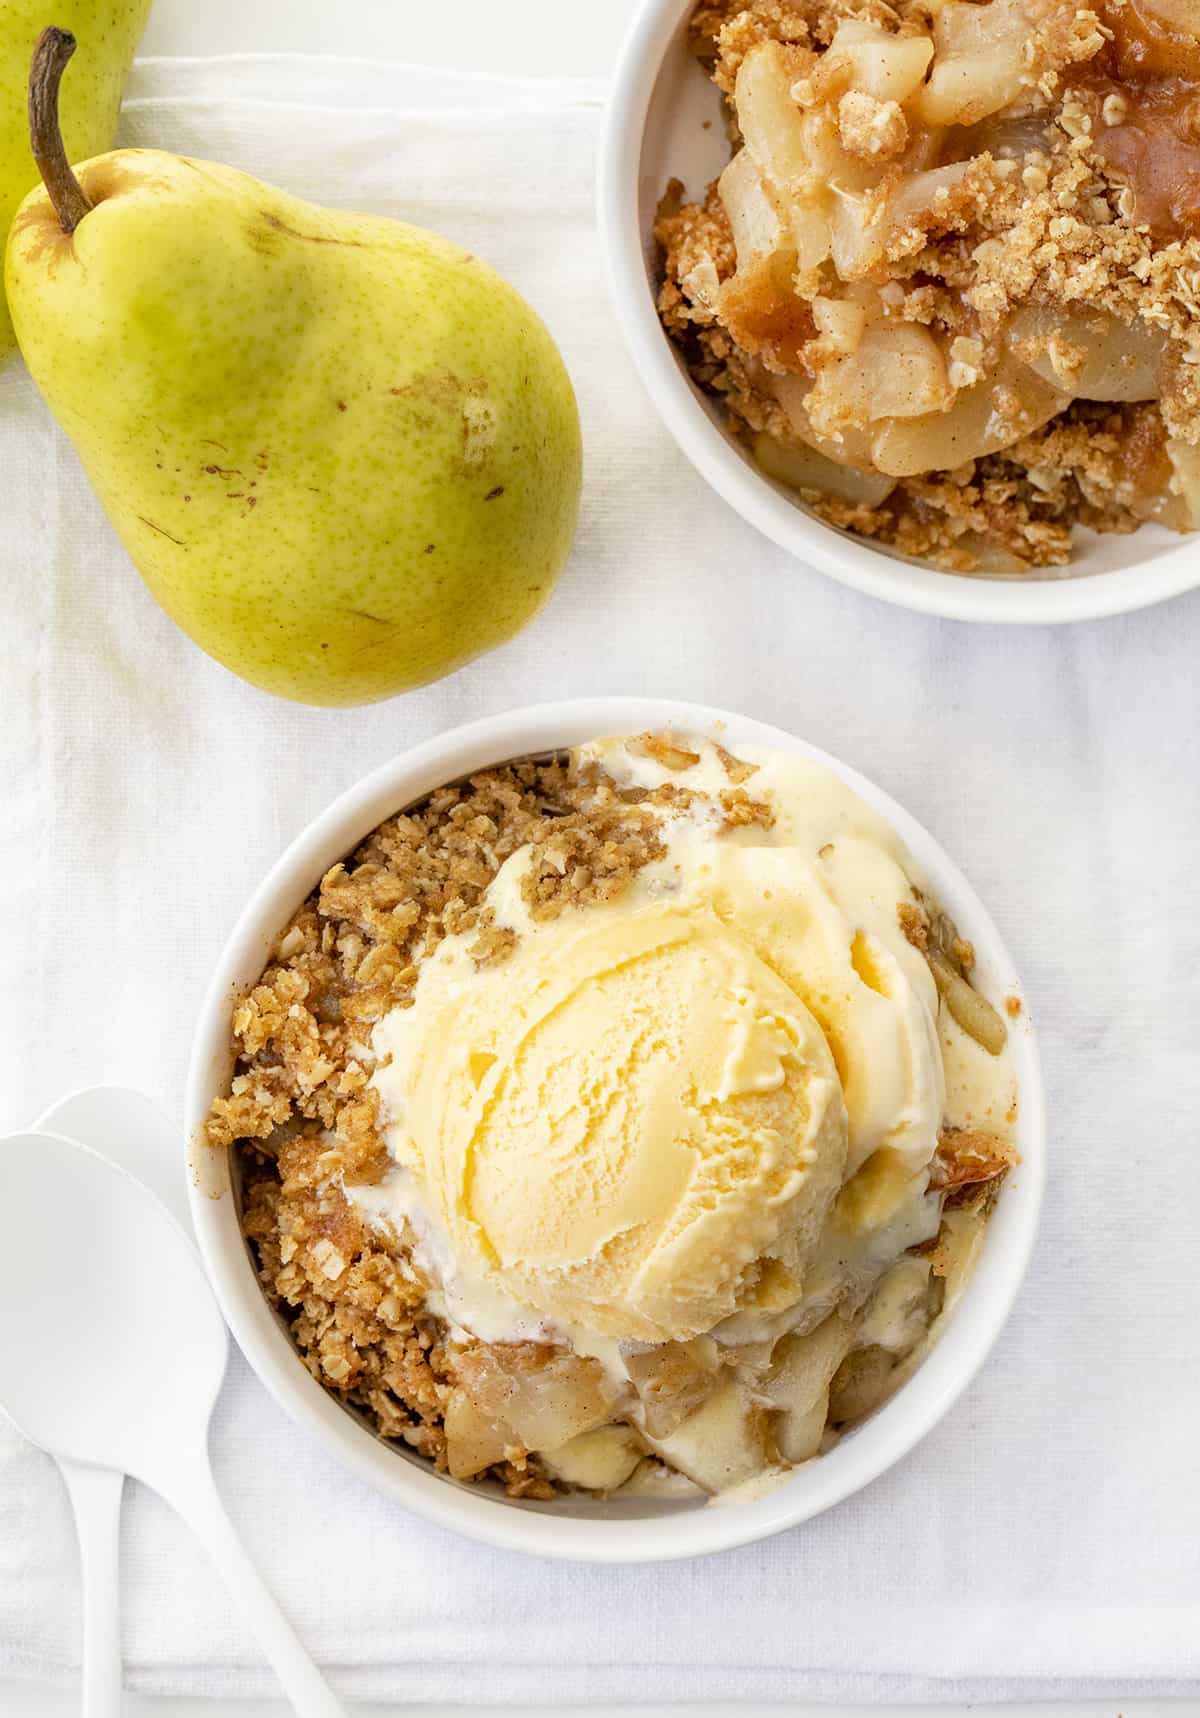 Image of Dishes of Gingered Pear Crisp with Ice Cream and One without Ice Cream. Dessert, Baking, Crisp, Best Crisp Recipes, Pear Crisp, Easy Pear Crisp, Holiday Desserts, Holiday Recipes, Old Fashioned Recipes, Historic Recipes, Grandma's Recipes, i am baker, iambaker